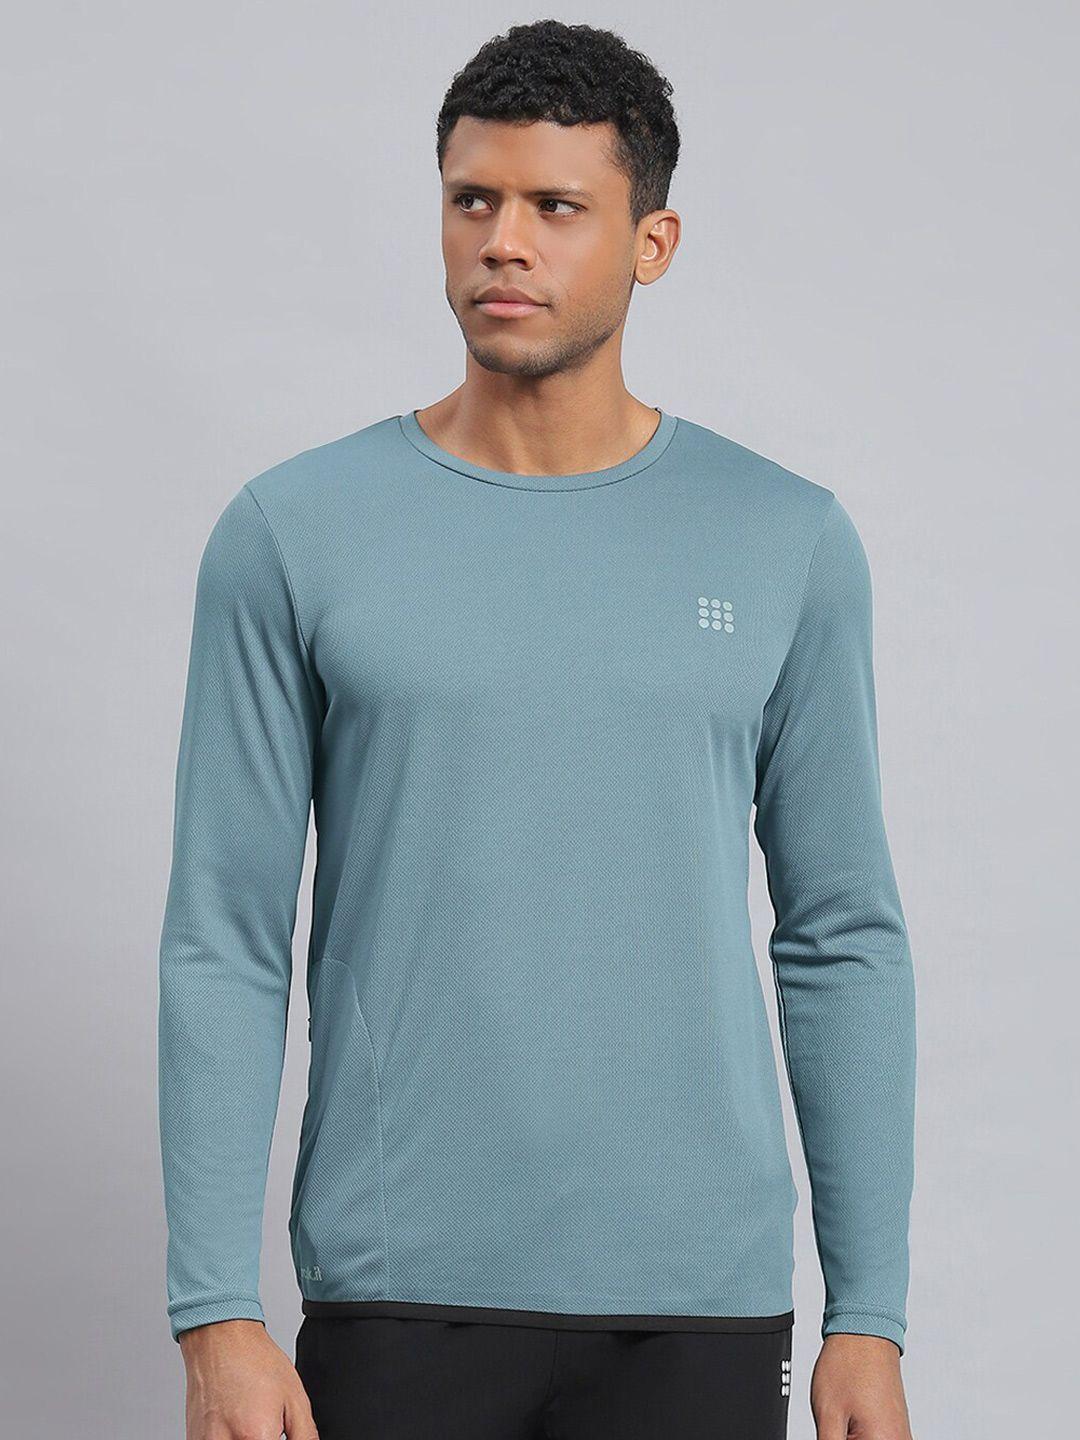 rock.it-round-neck-long-sleeves-t-shirt